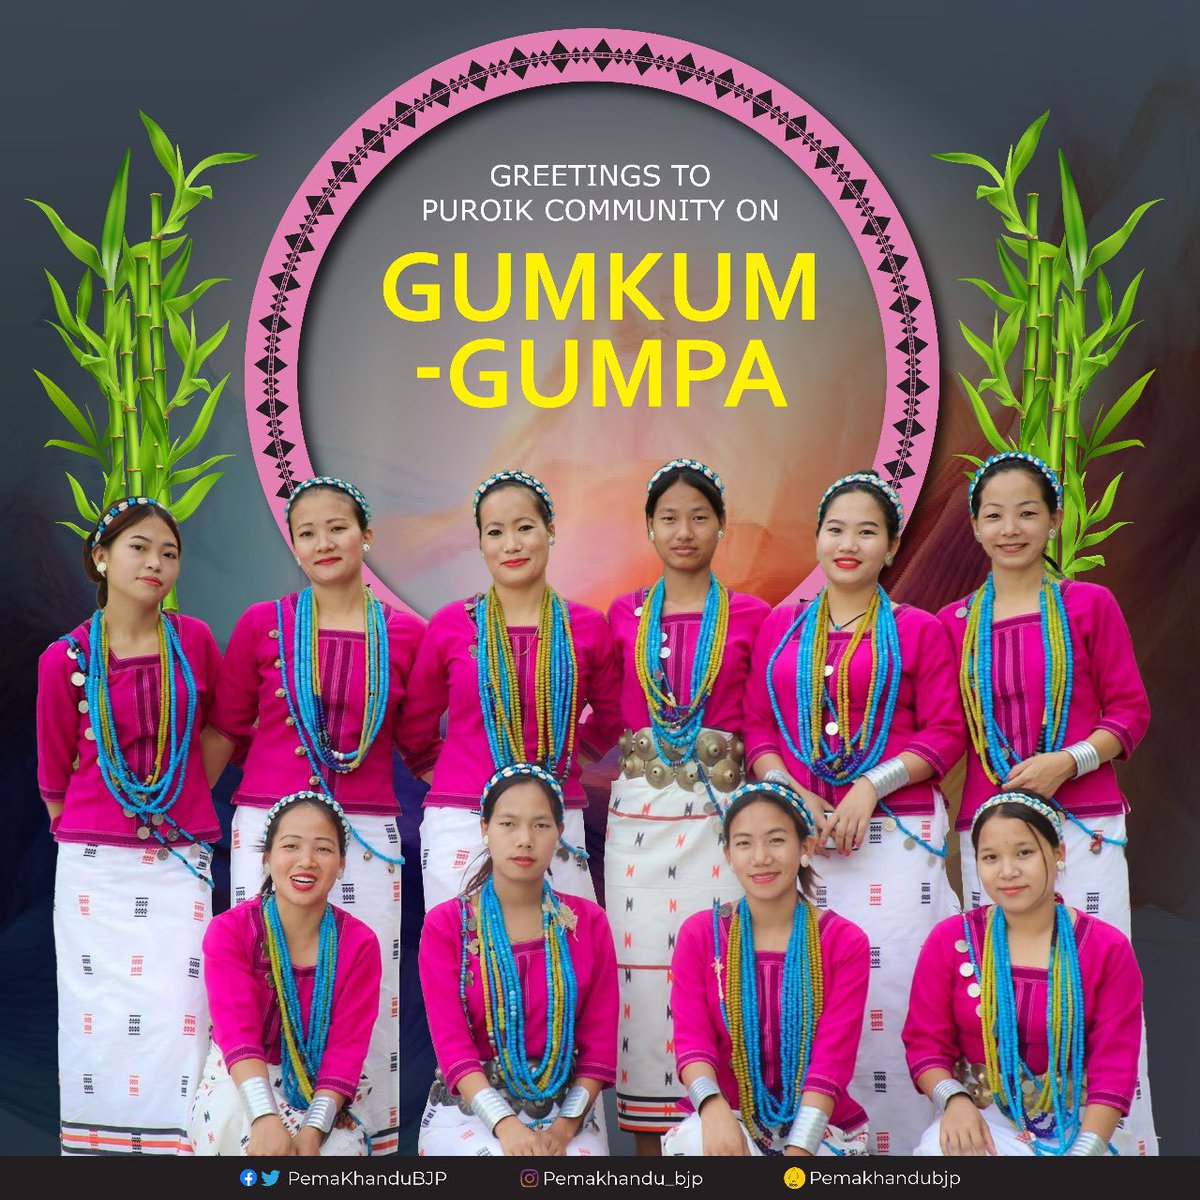 Festival of Gumkum Gumpa is not only a joyous occasion for the Puroik community but for all the citizens of Arunachal Pradesh. It is a moment to reflect on our rich traditions, bonding and mutual trust to build a society on the pillars of brotherhood, love, respect and